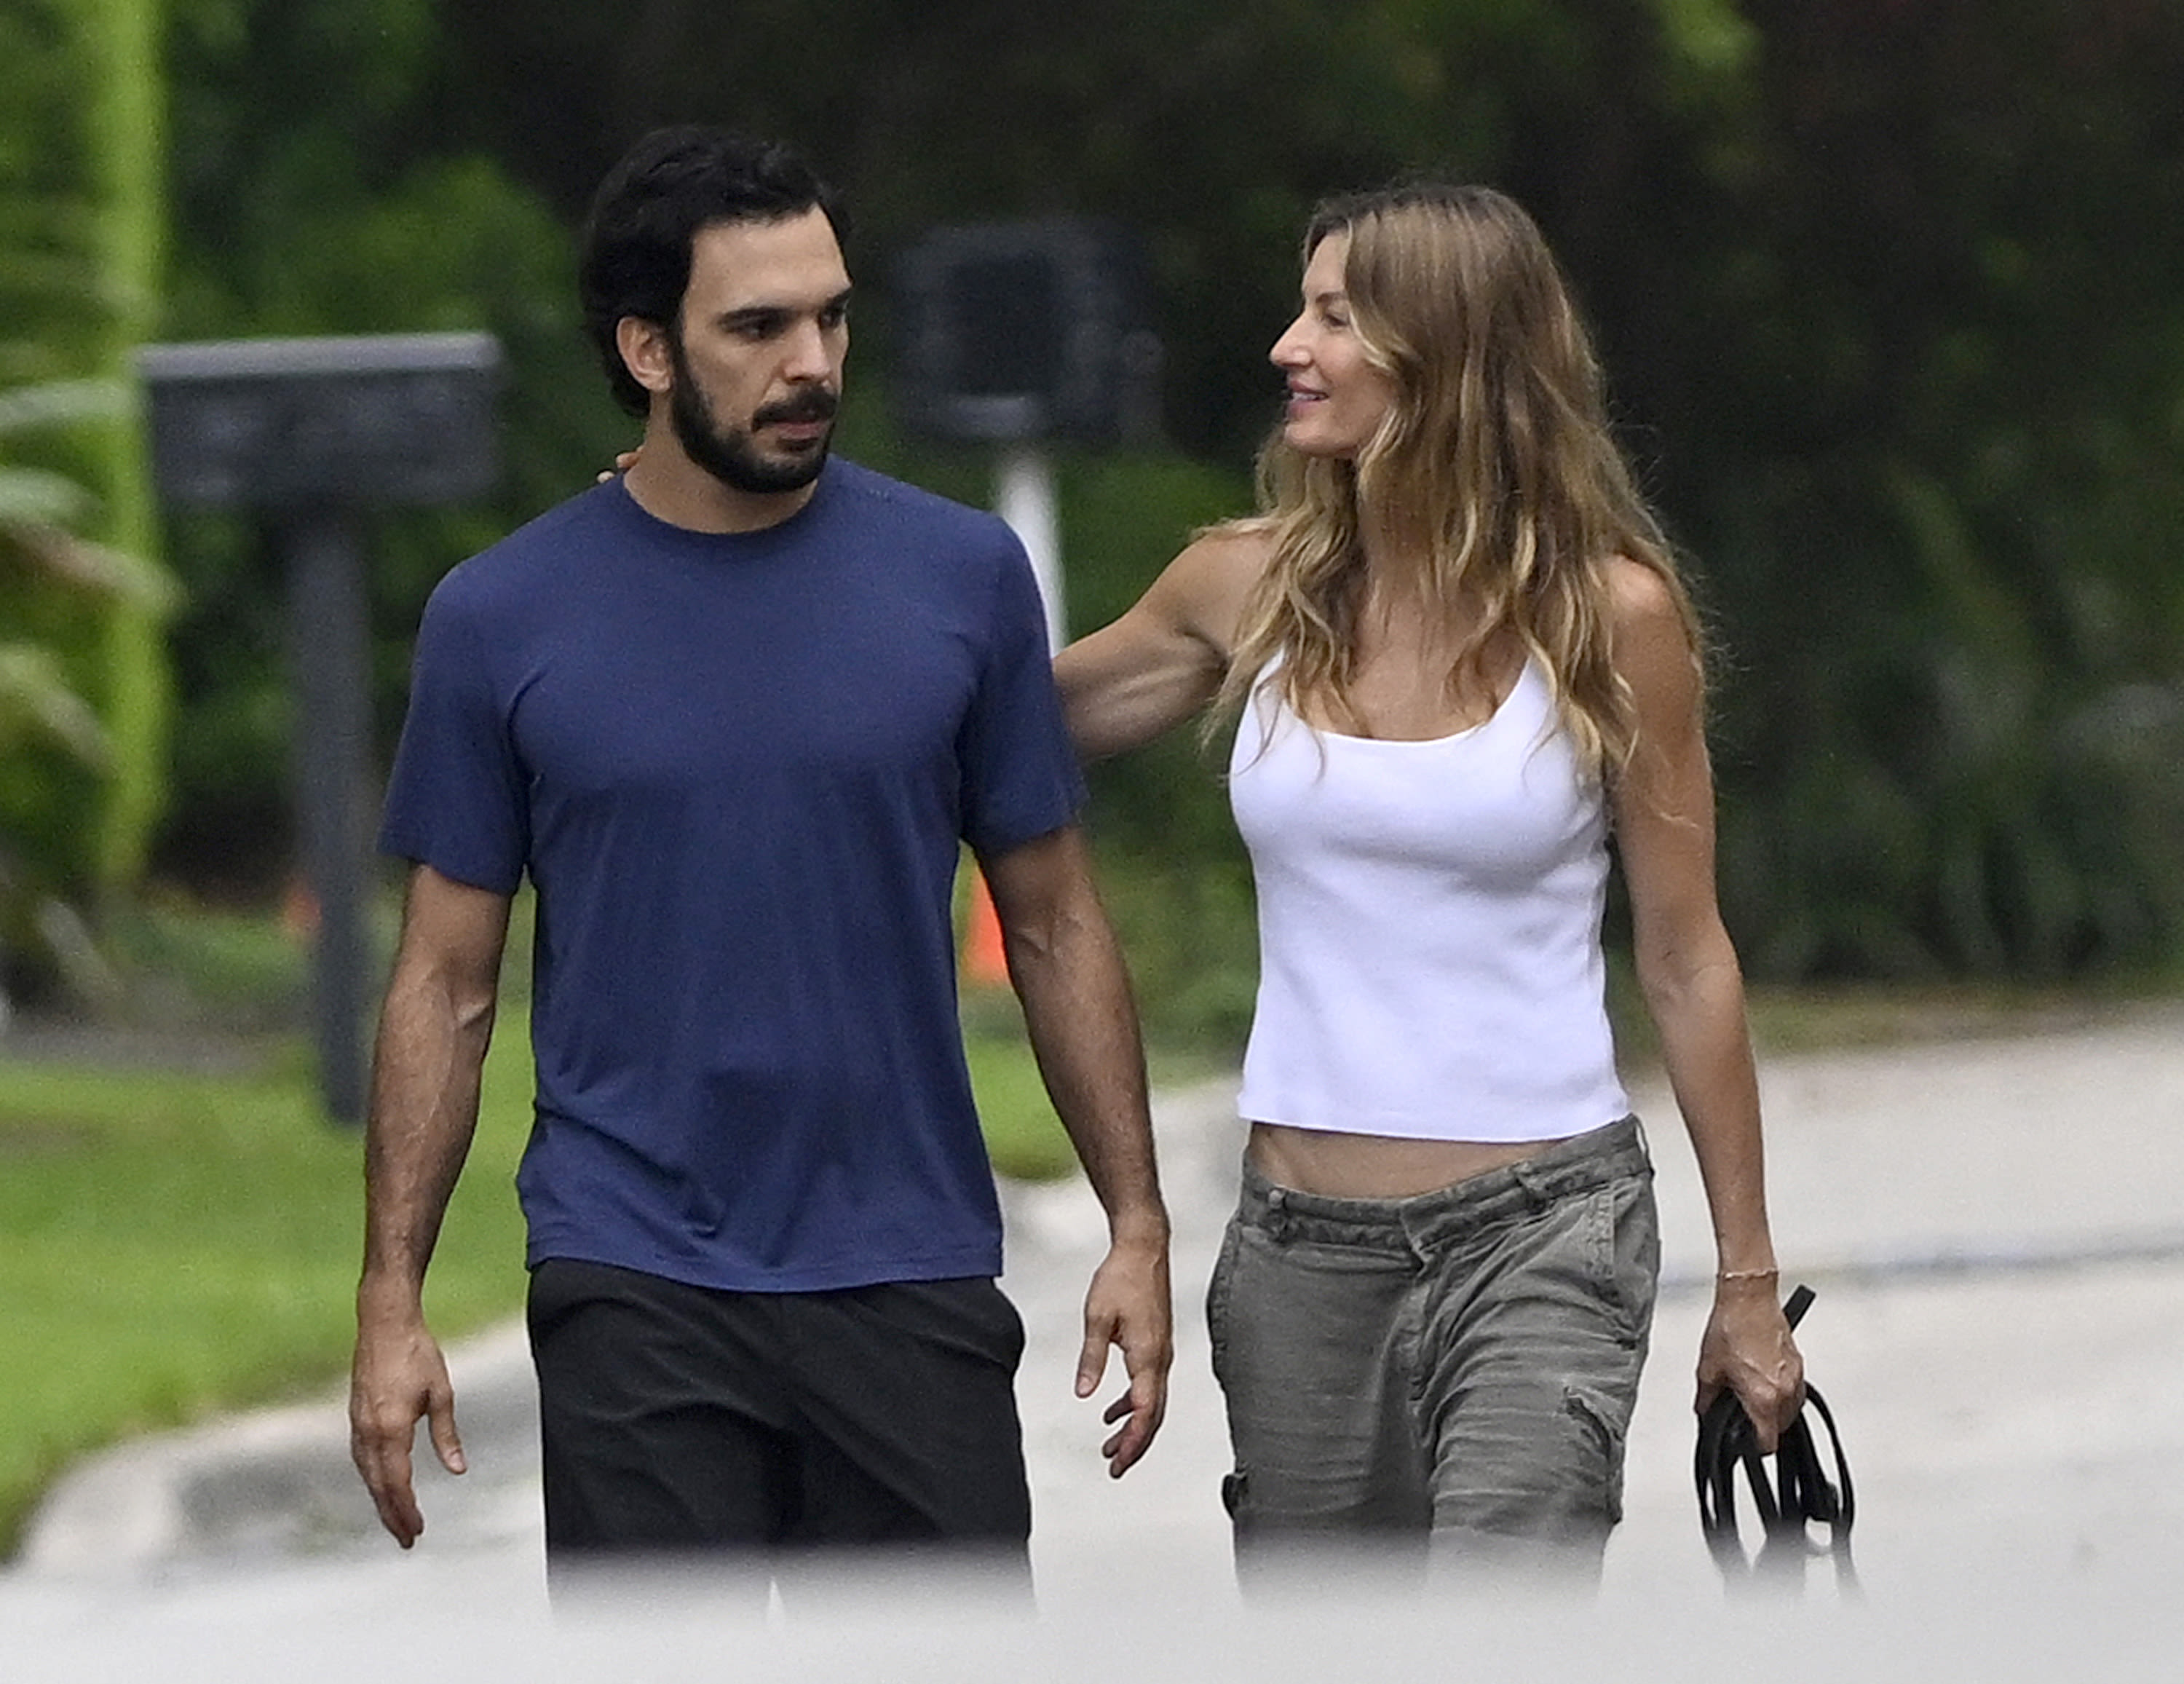 Gisele Bundchen and Joaquim Valente Are Planning a ‘Low-Key Wedding’ at Her Costa Rica Estate